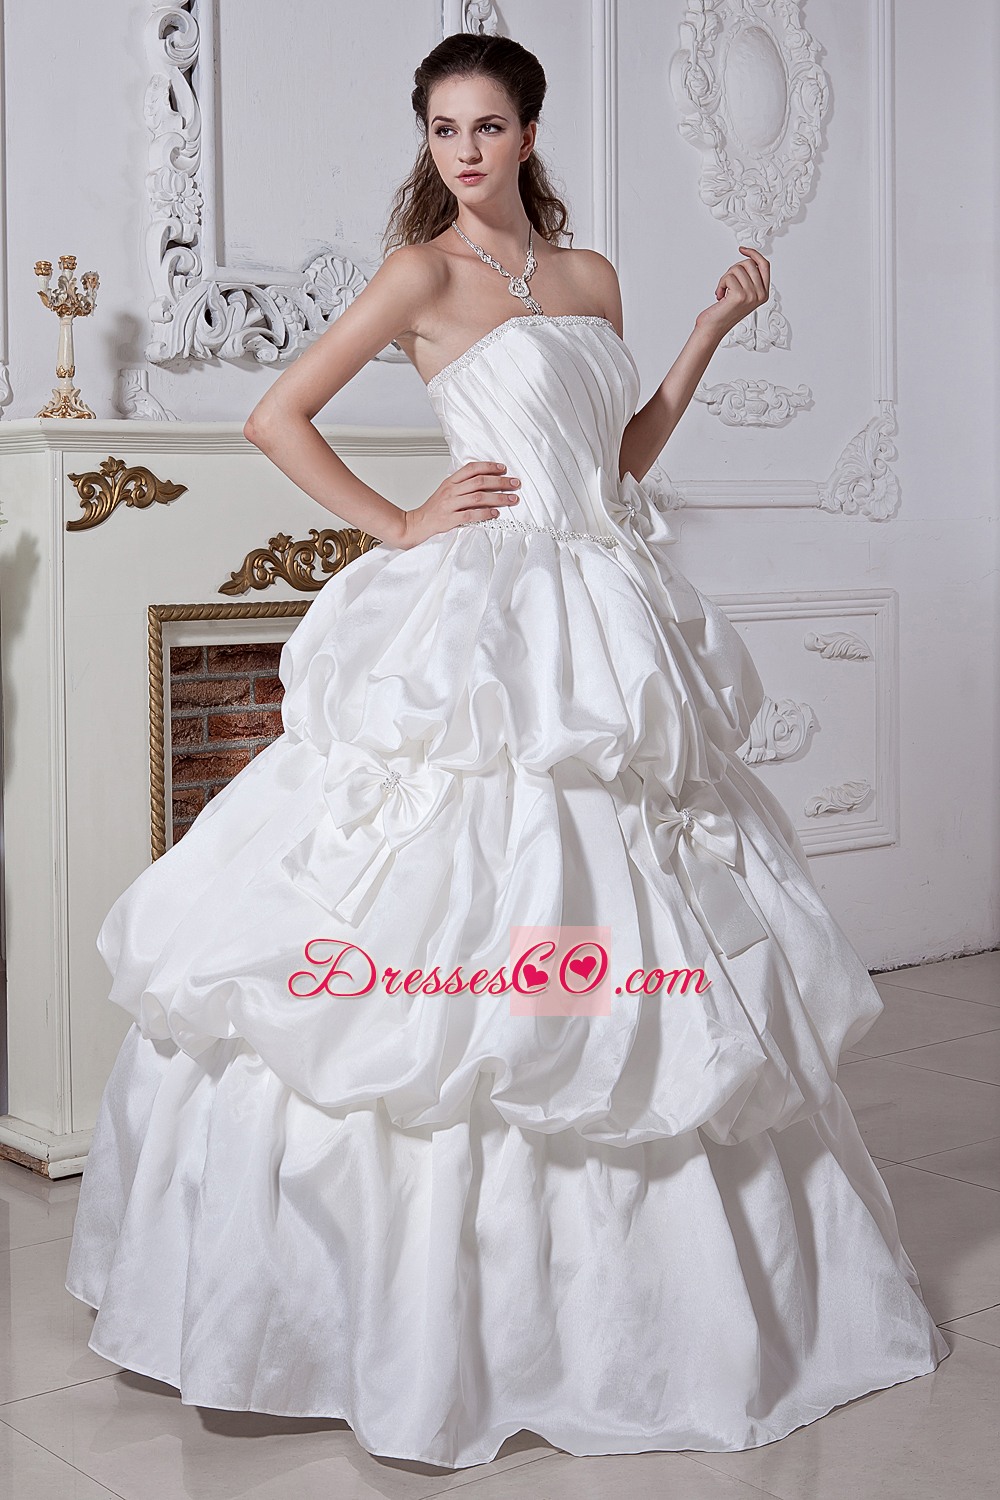 Classical A-line / Princess Strapless Long Satin Beading And Bows Wedding Dress